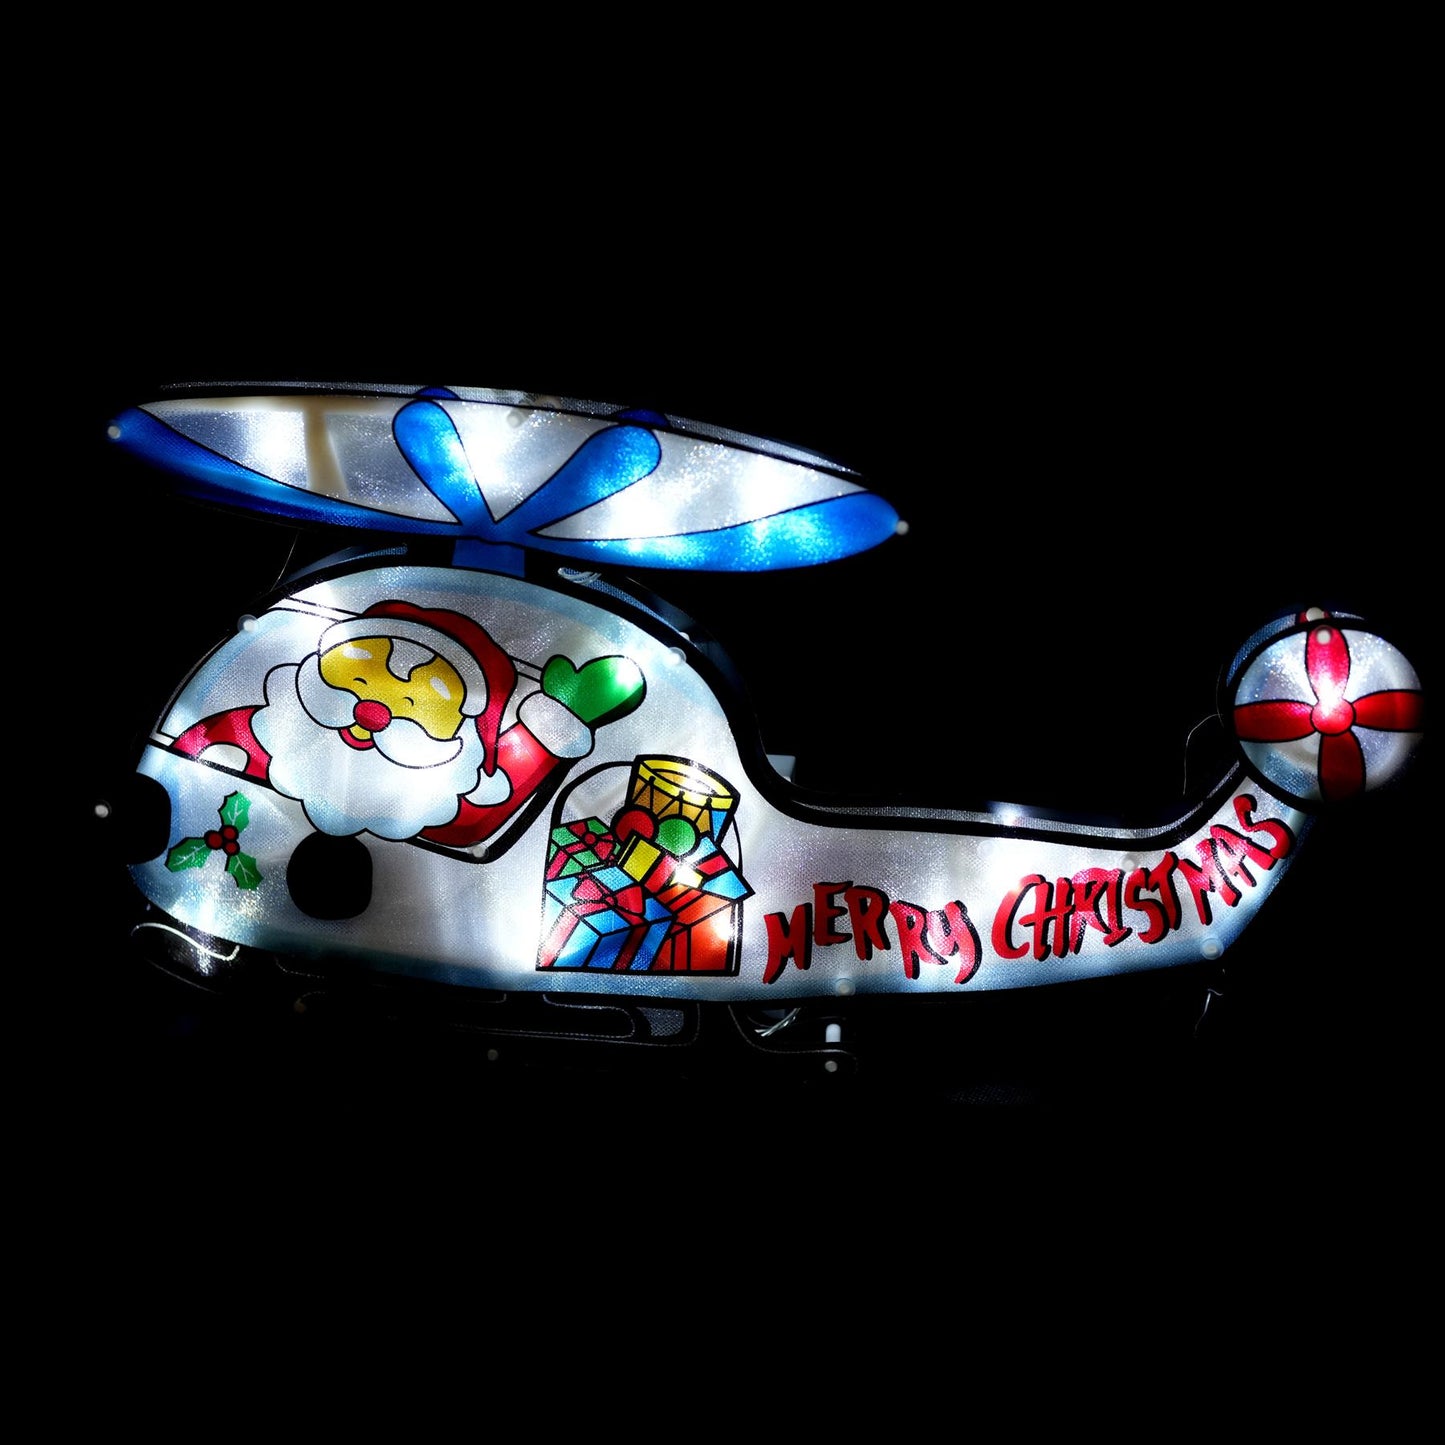 Helicopter Sign Christmas LED Light Silhouette by The Magic Toy Shop - UKBuyZone